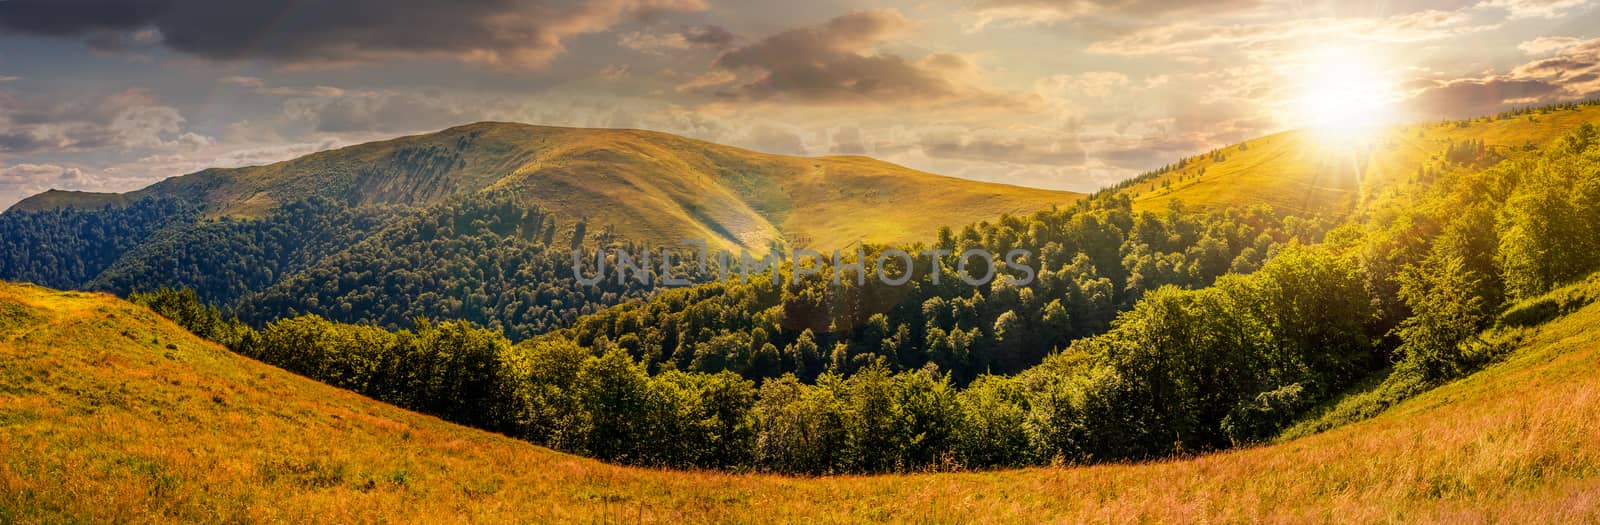 hillside panorama in mountains at sunset by Pellinni